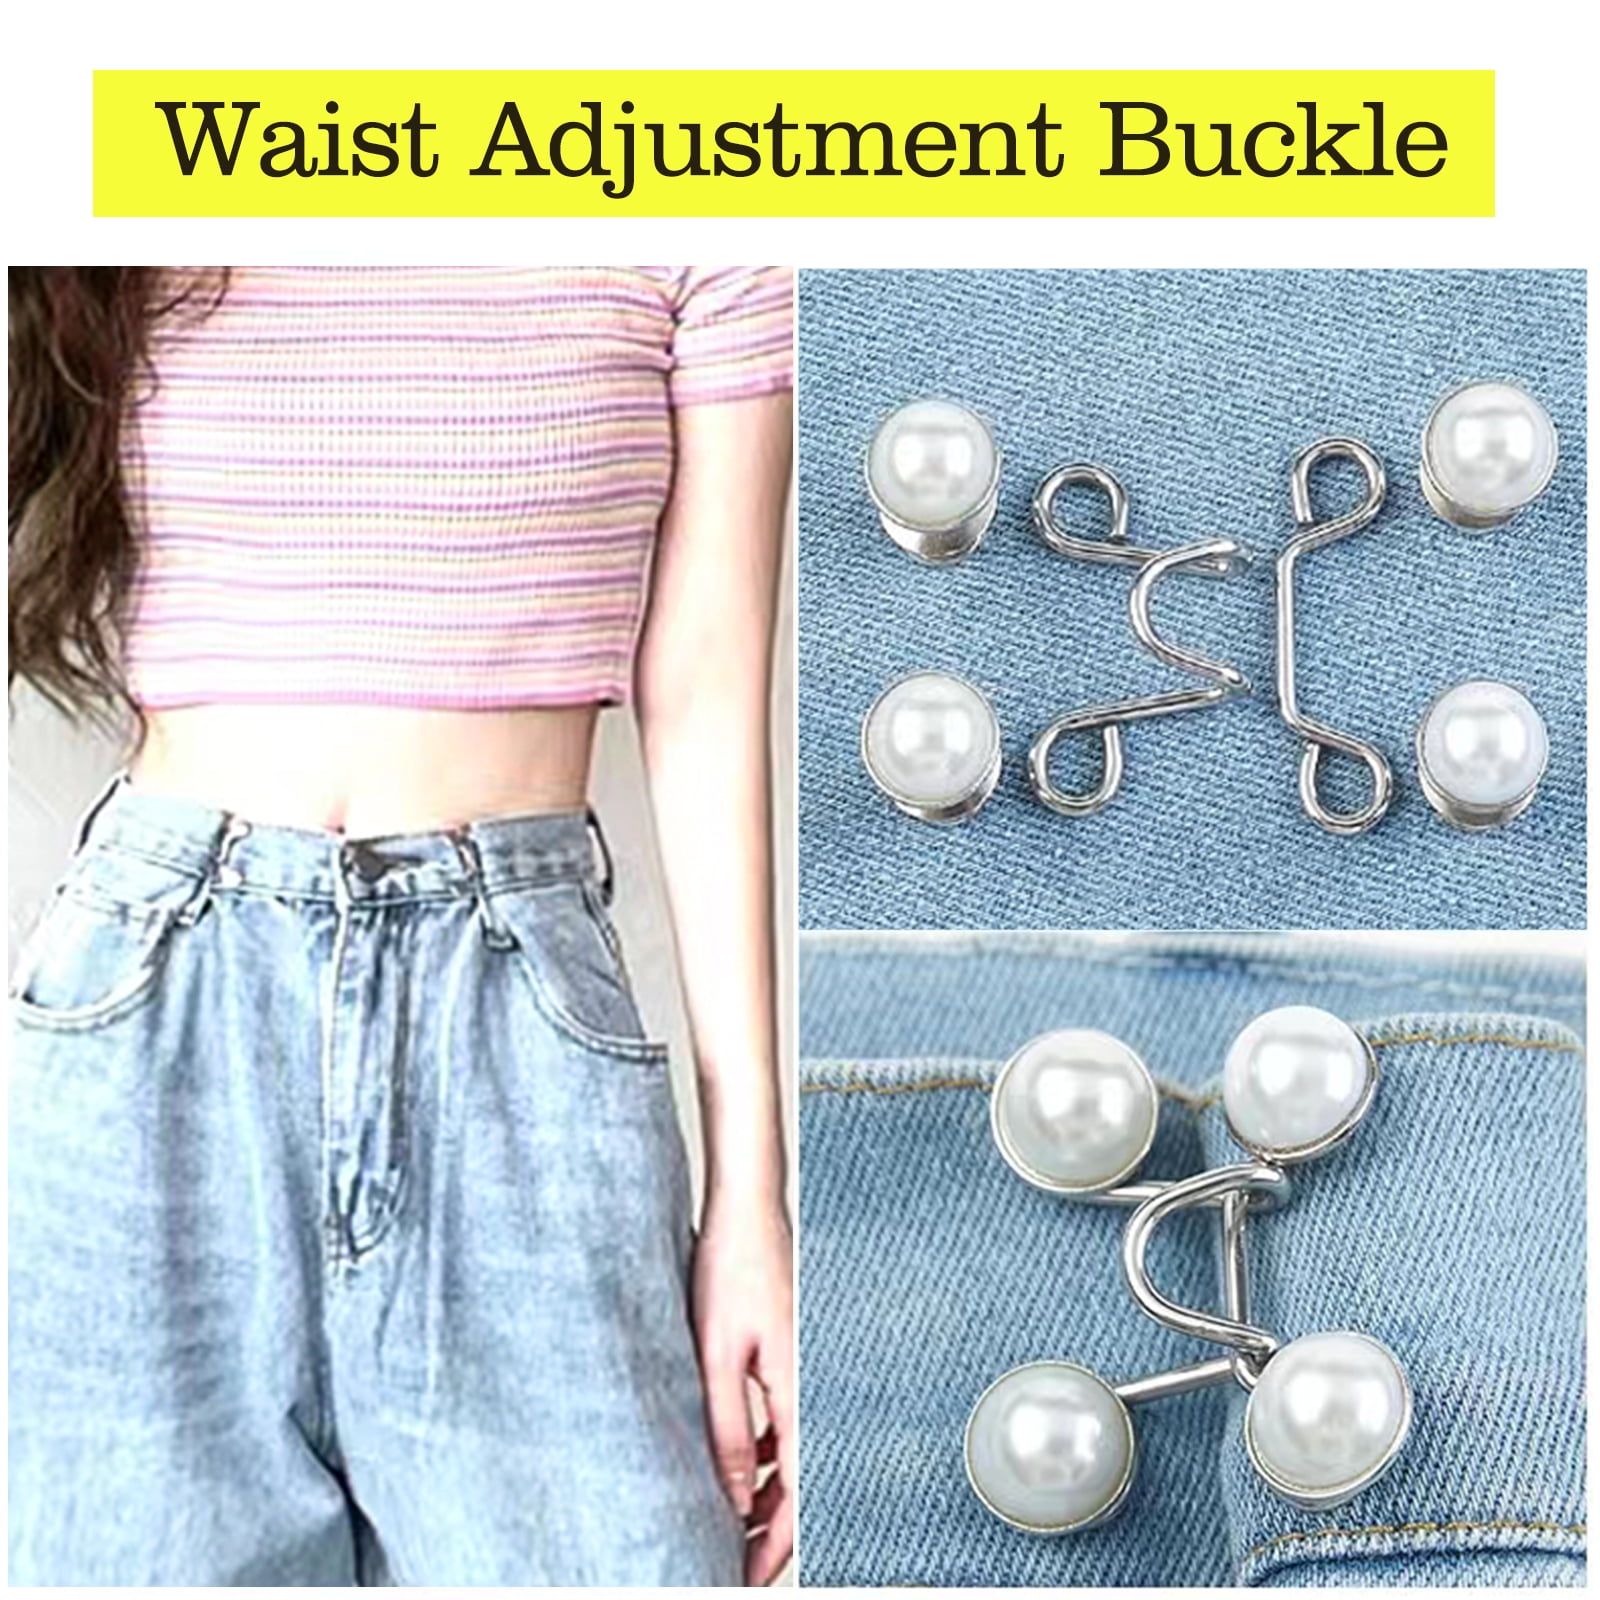 Jean Button Pins Adjustable Waist Buckle Extender Set Of 4, No Sewing  Required Jean Buttons, Pant Waist Tightener For Jeans Dress Fit Instant  Button